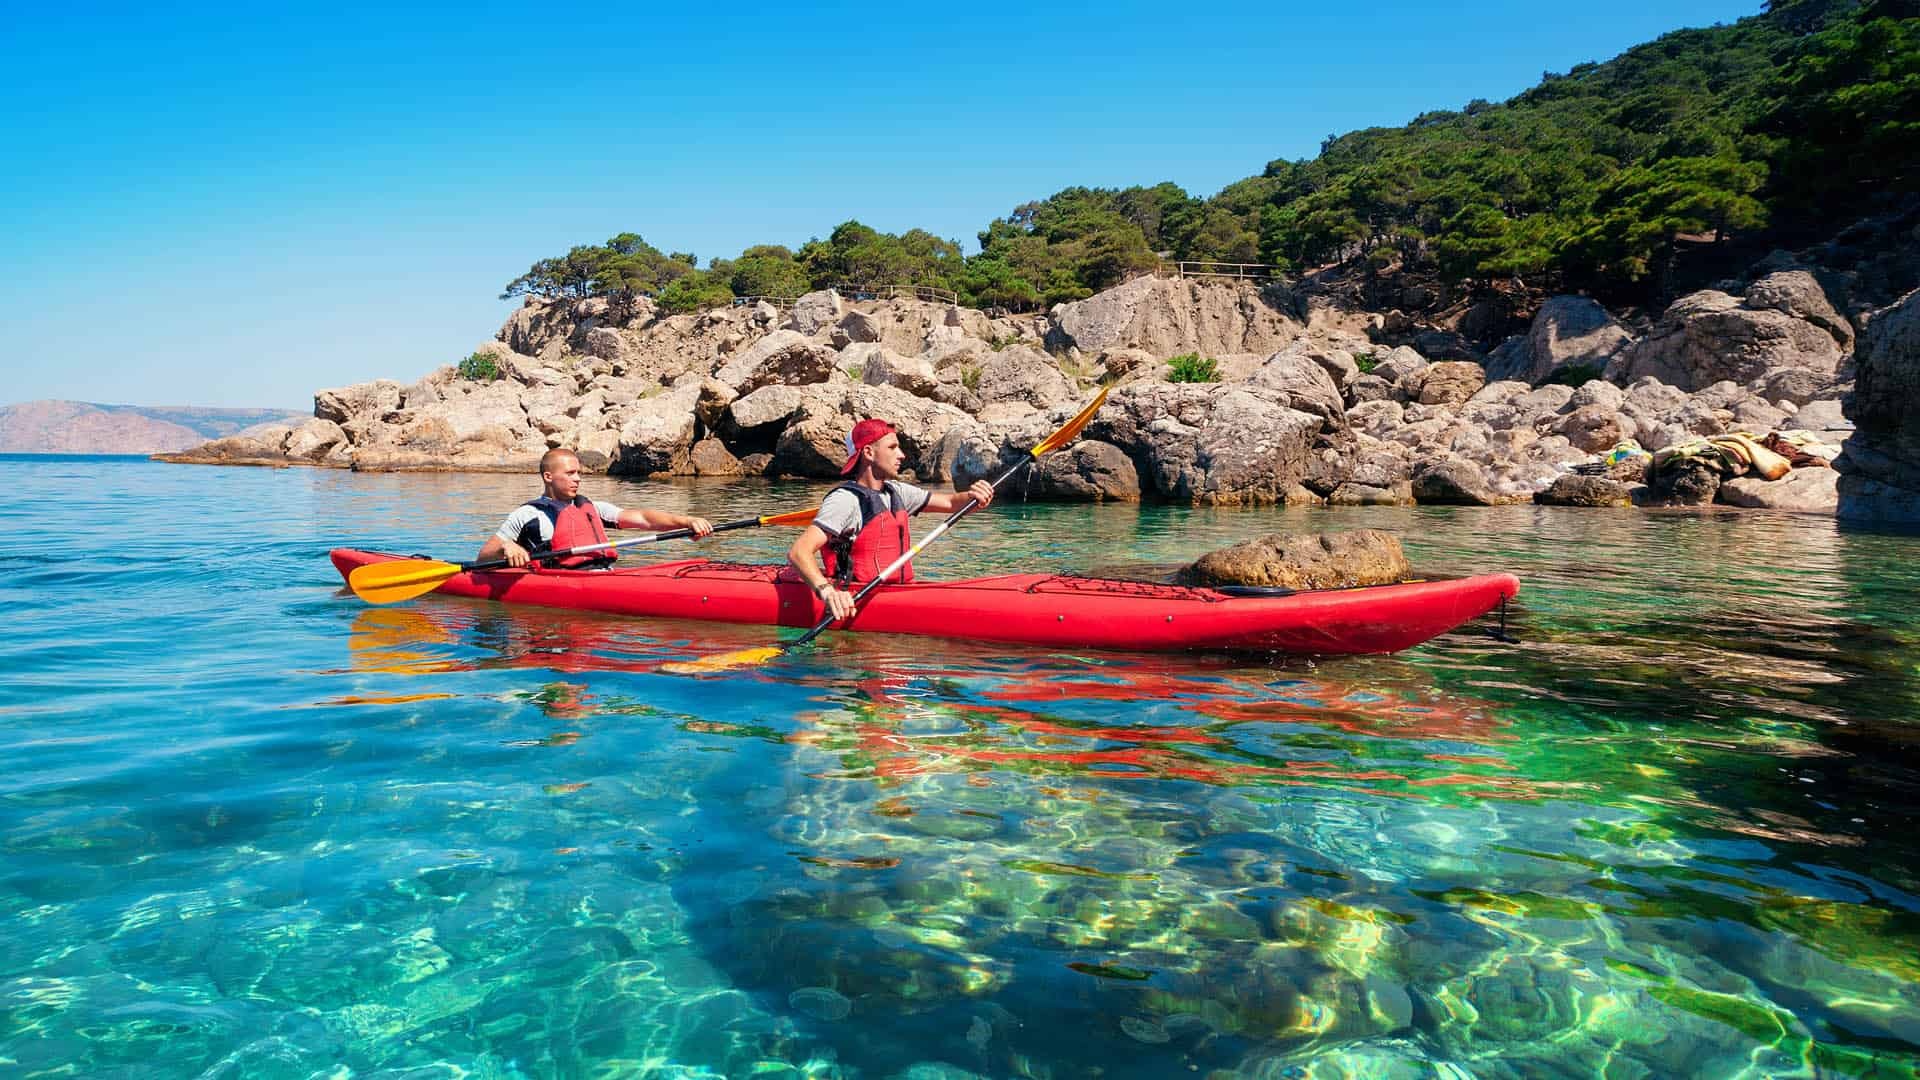 Kayaking: A couple of kayakers in the Adriatic Sea, Croatia extended water trips. 1920x1080 Full HD Background.